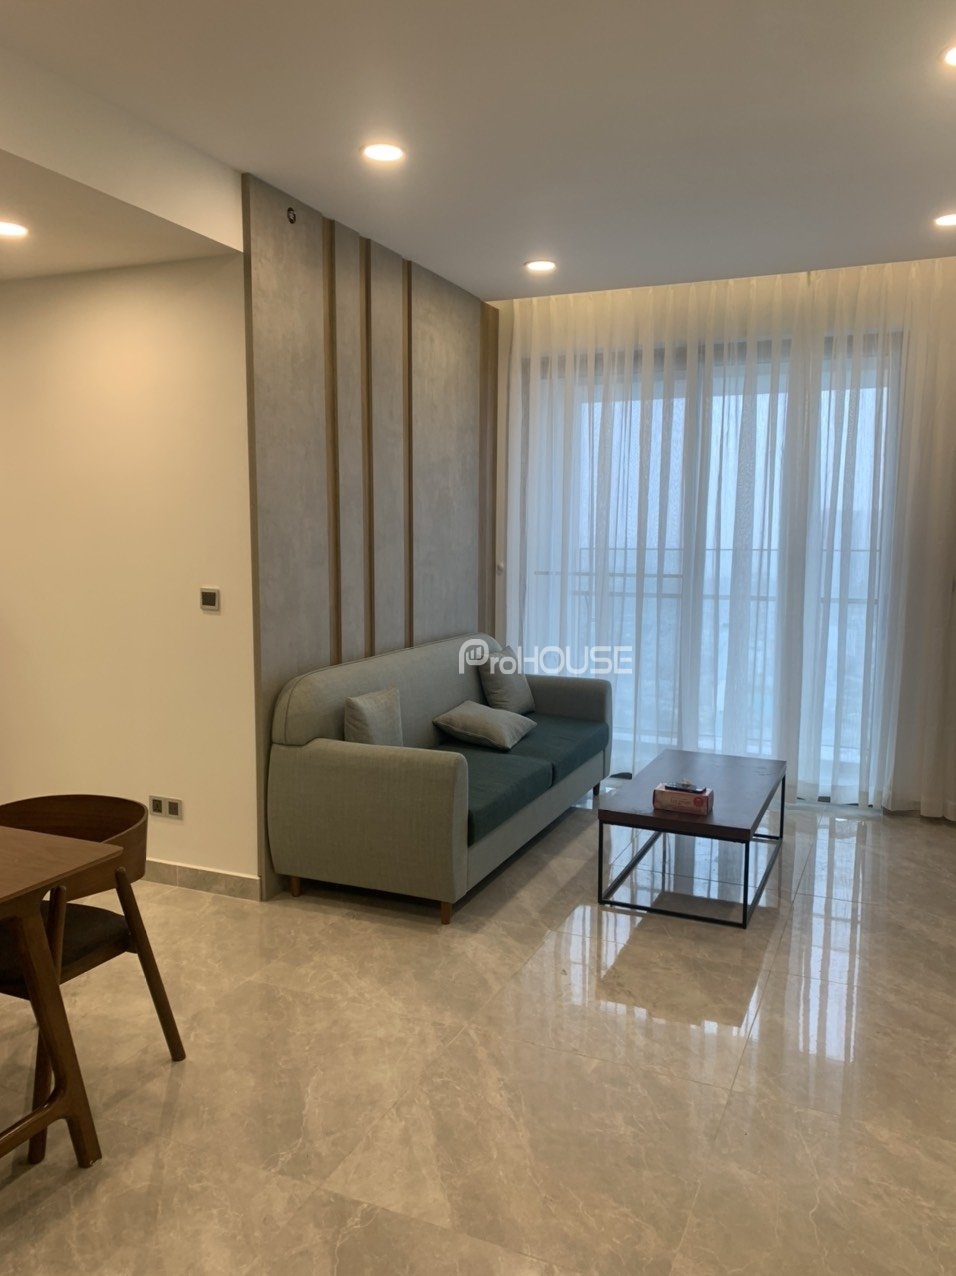 Open view apartment for rent in Midtown with 3 bedrooms fully furnished